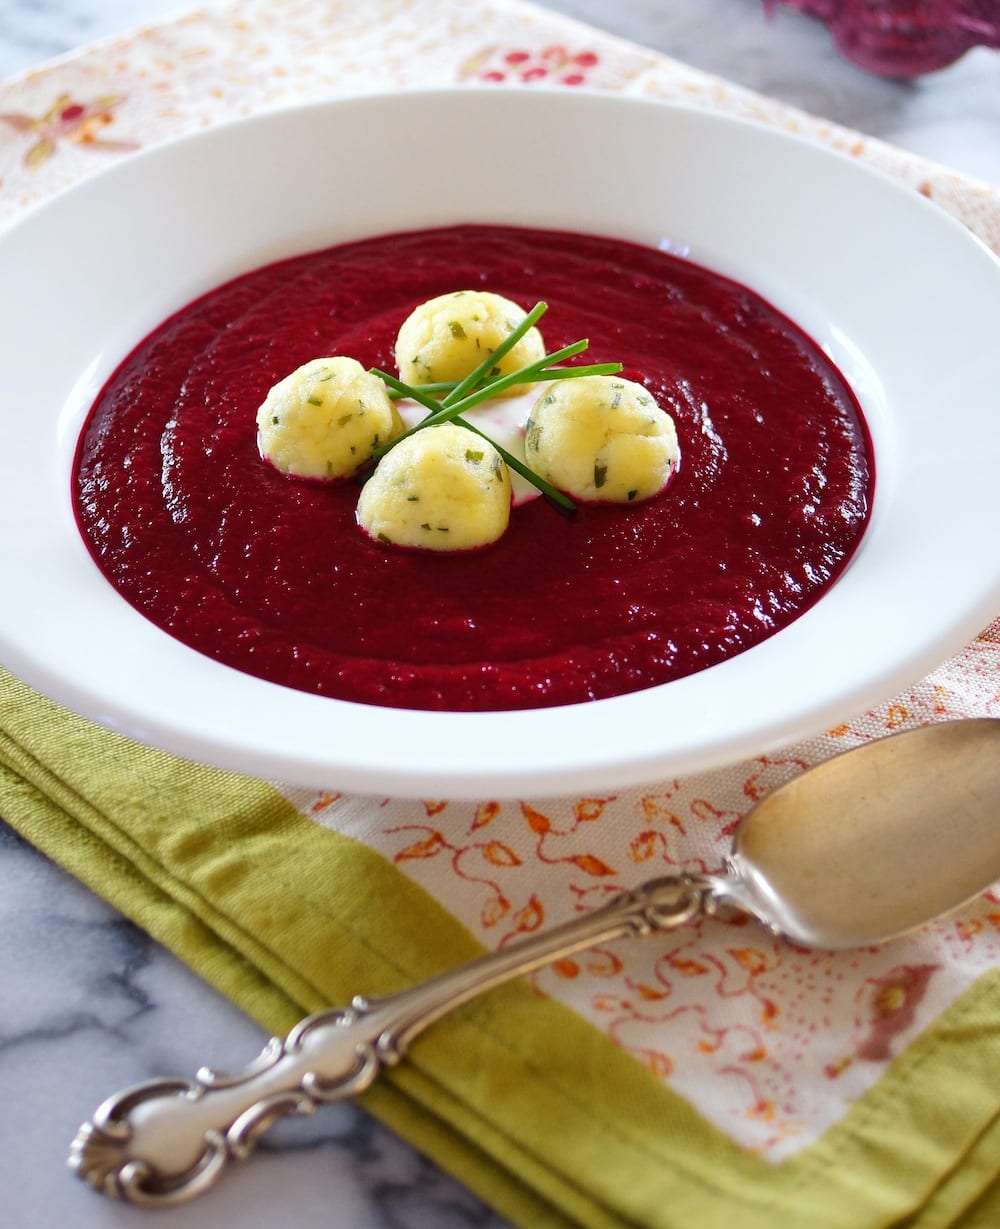 Beetroot Soup with Horseradish Dumplings and Chives